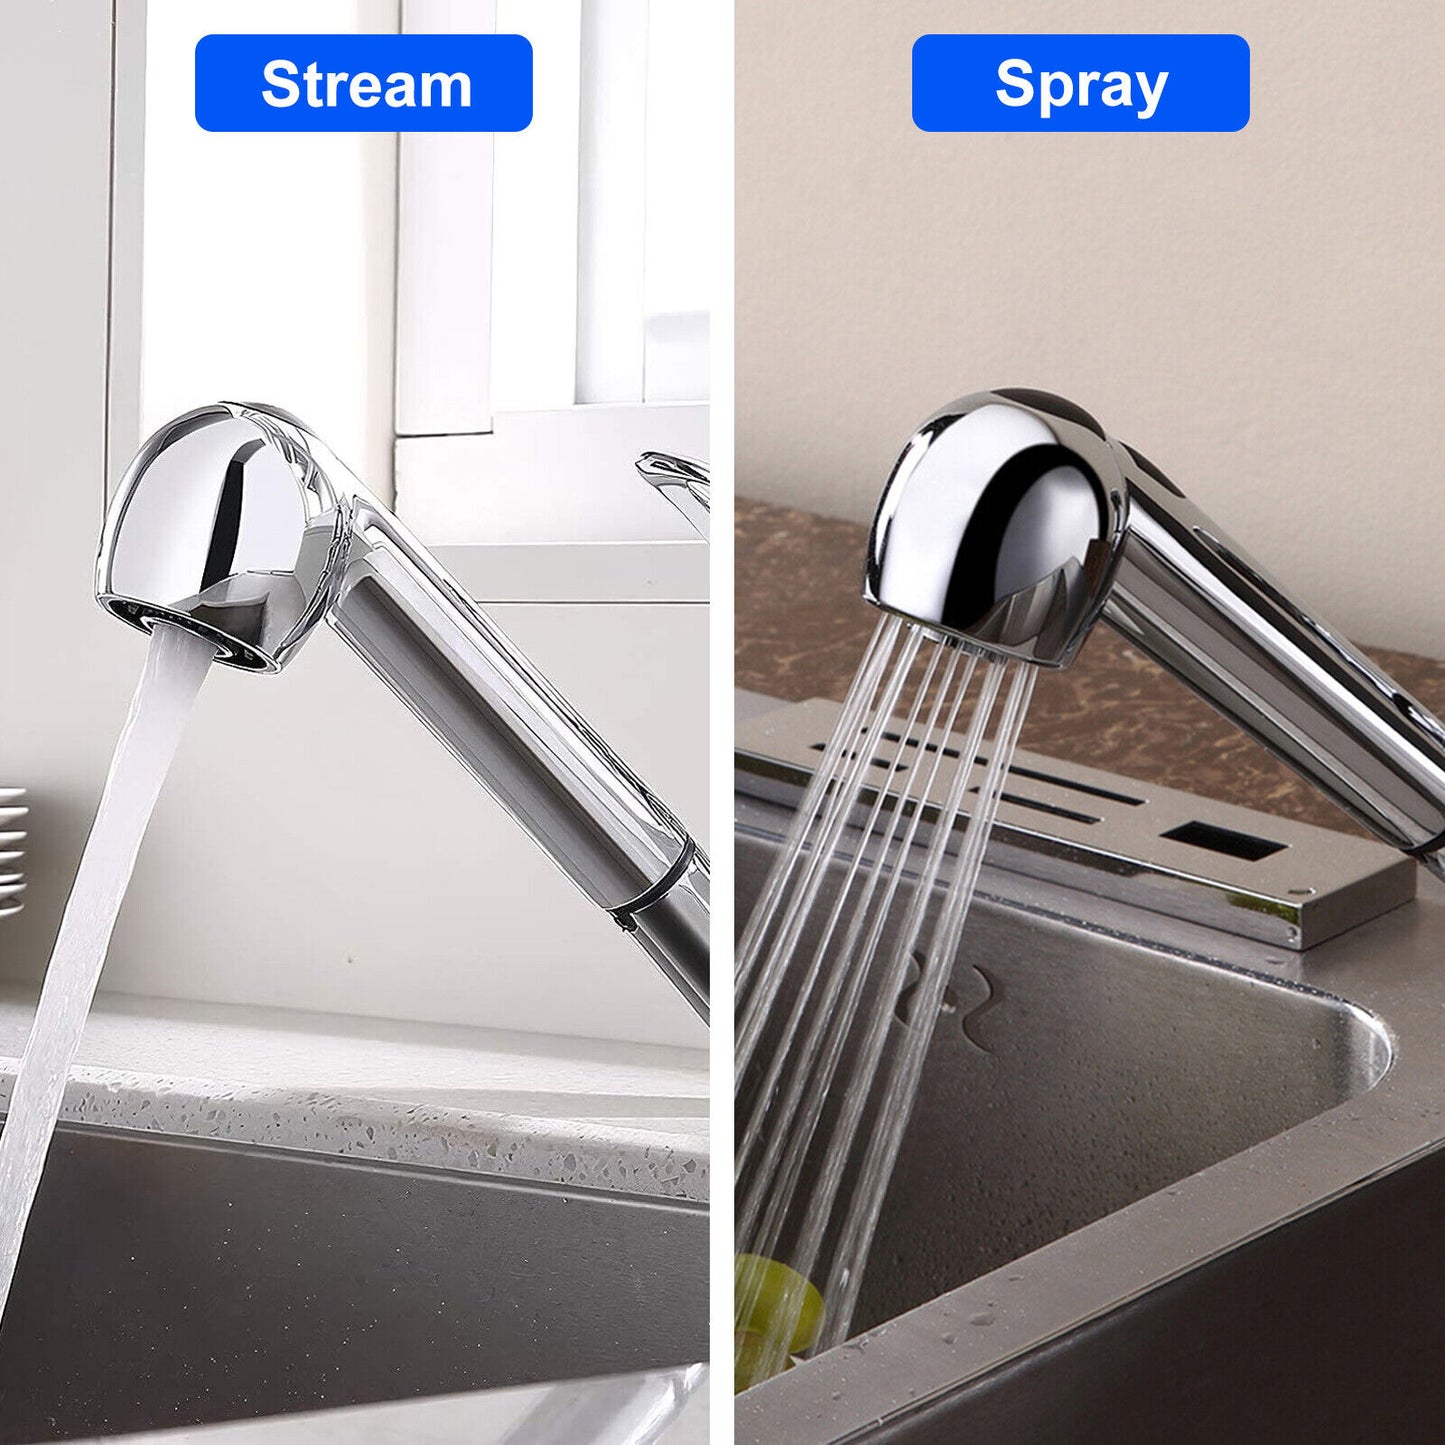 Replacement Sprayer Head Kitchen Faucet - Universal Compatibility Kitchen Faucet,Premium Dual-Mode Pull-Out Sink Sprayer Head for Bathroom Kitchen Sink Mixer Tap